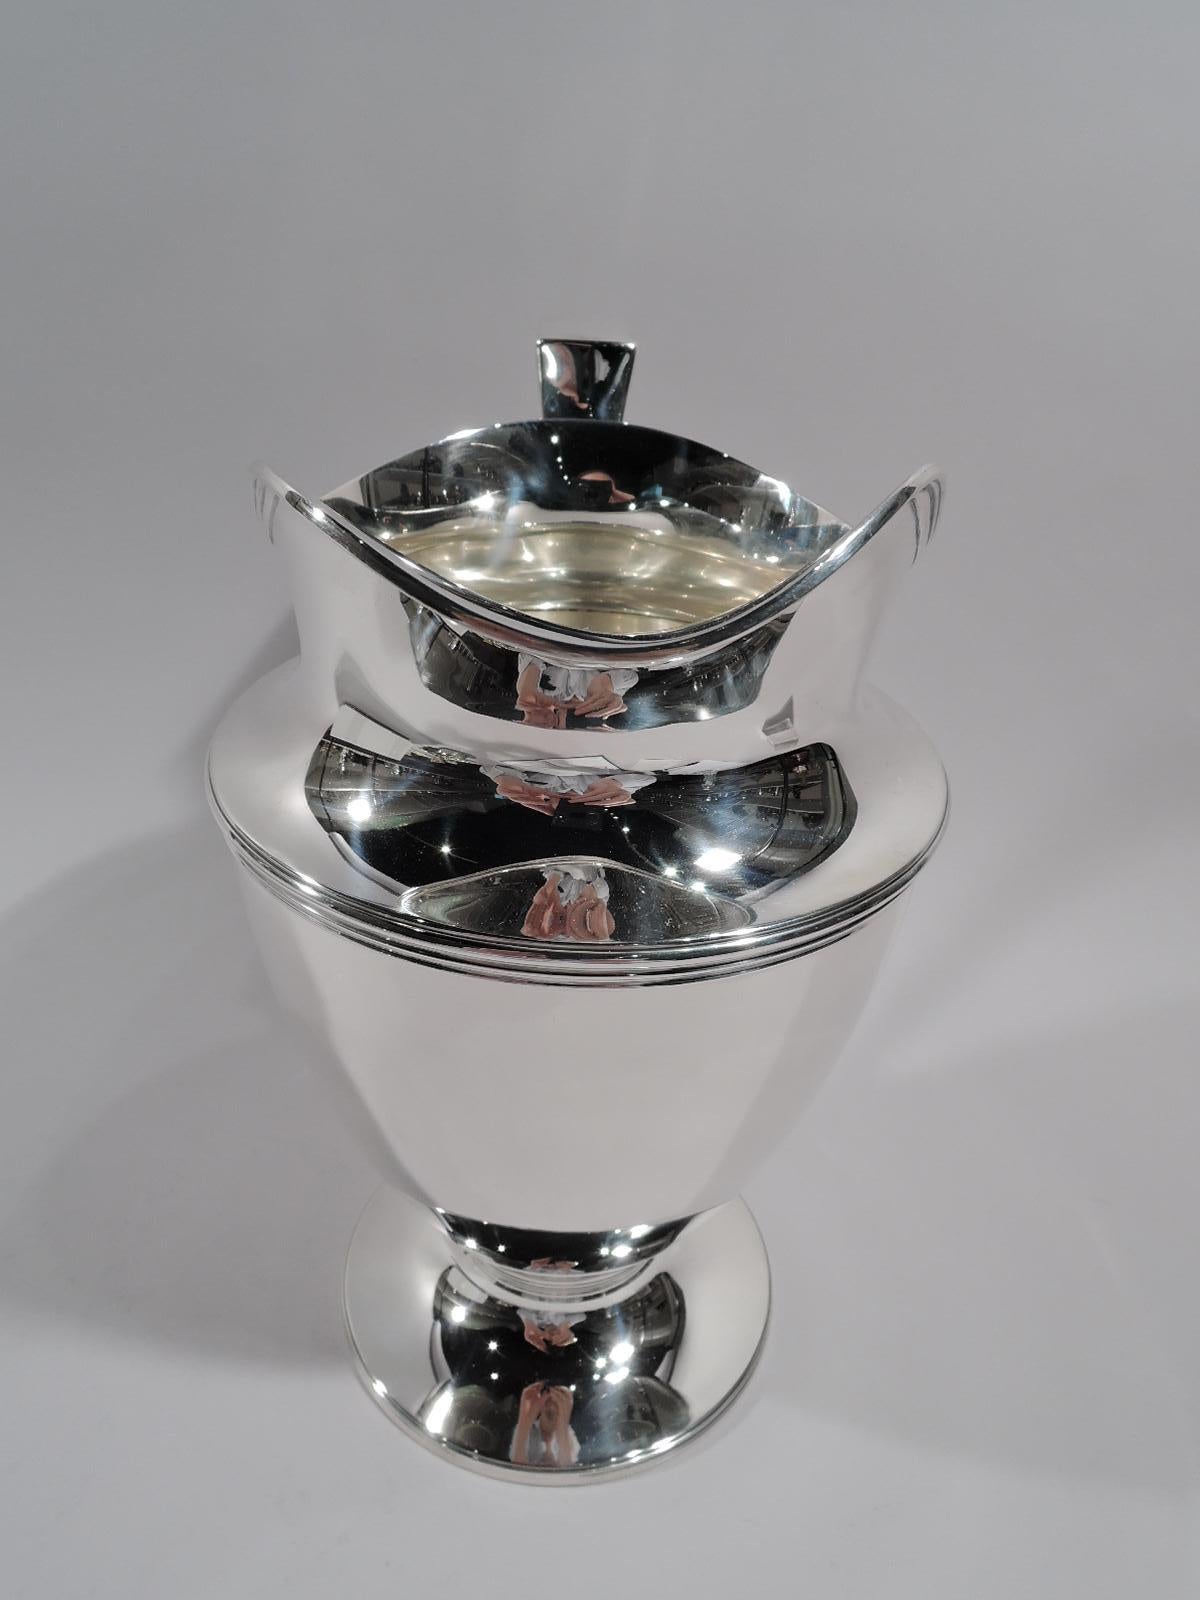 Classic sterling silver water pitcher. Made by Tiffany & Co. in New York, circa 1911. Curved and tapering body, raised and stepped foot, scrolled bracket handle, and helmet mouth. Reeding. Fully marked including pattern no. 18181 (first produced in